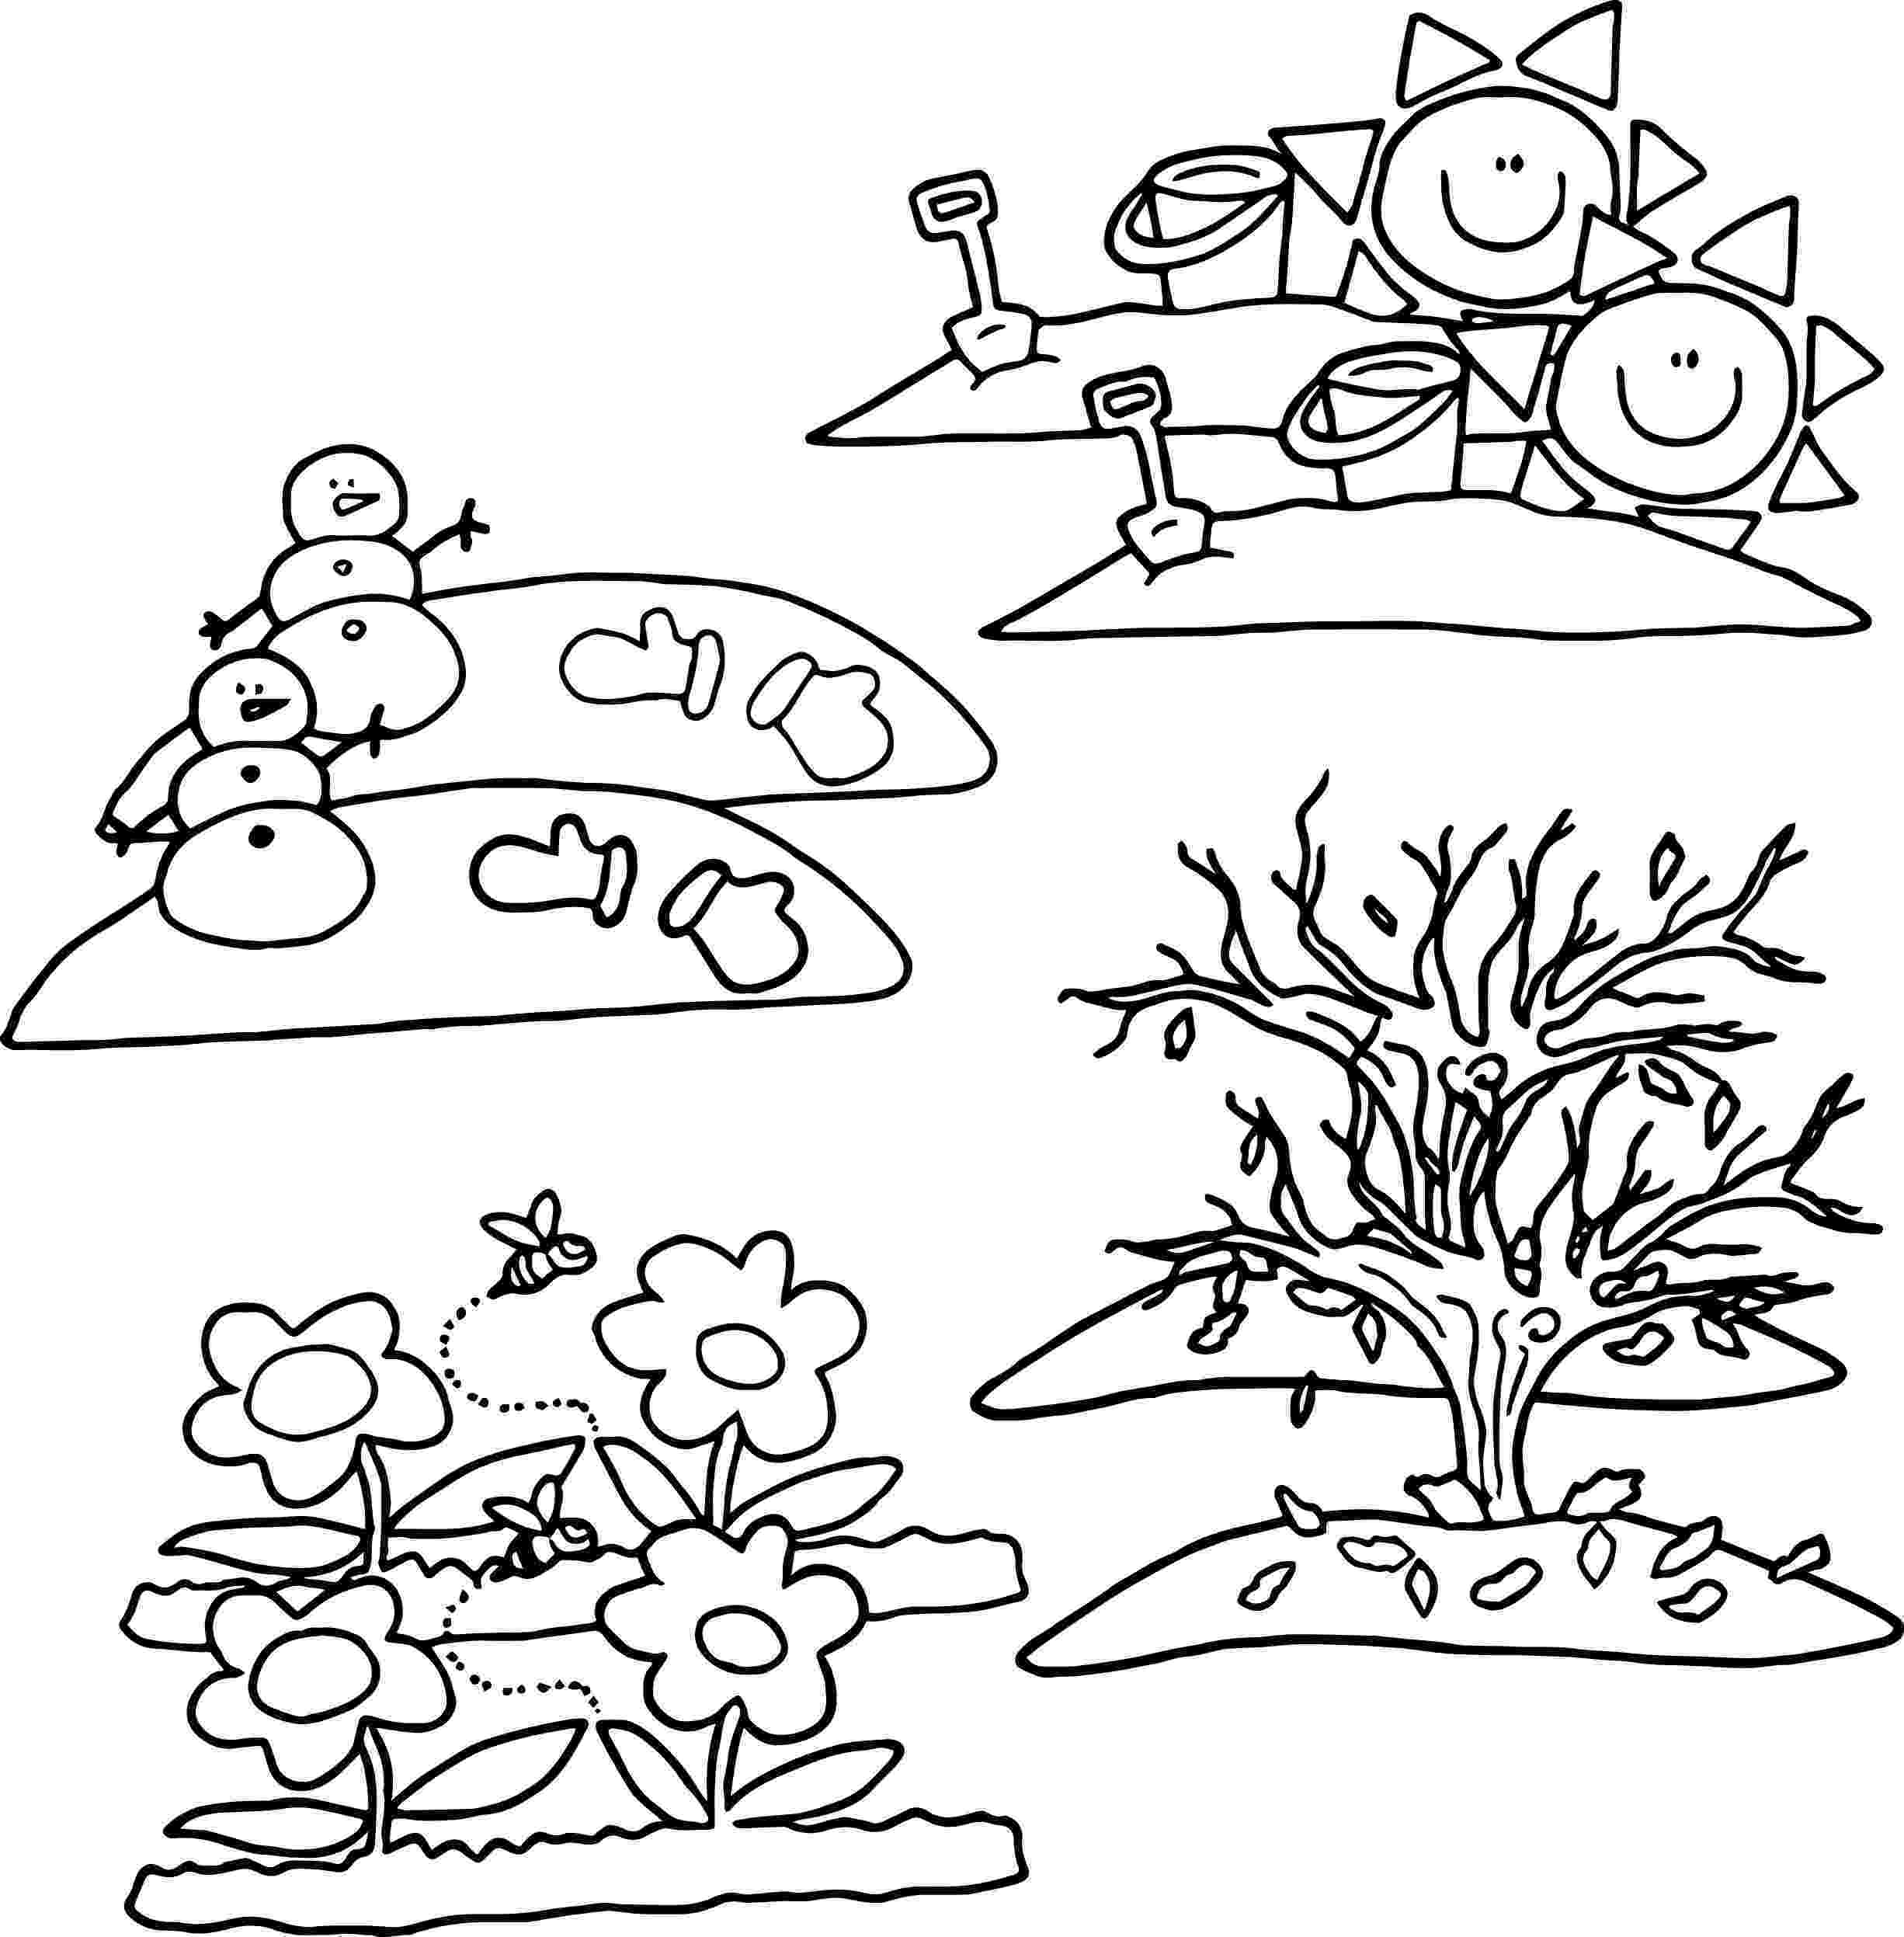 seasons coloring pages 4 seasons coloring page wecoloringpage 5 Évszakok pages seasons coloring 